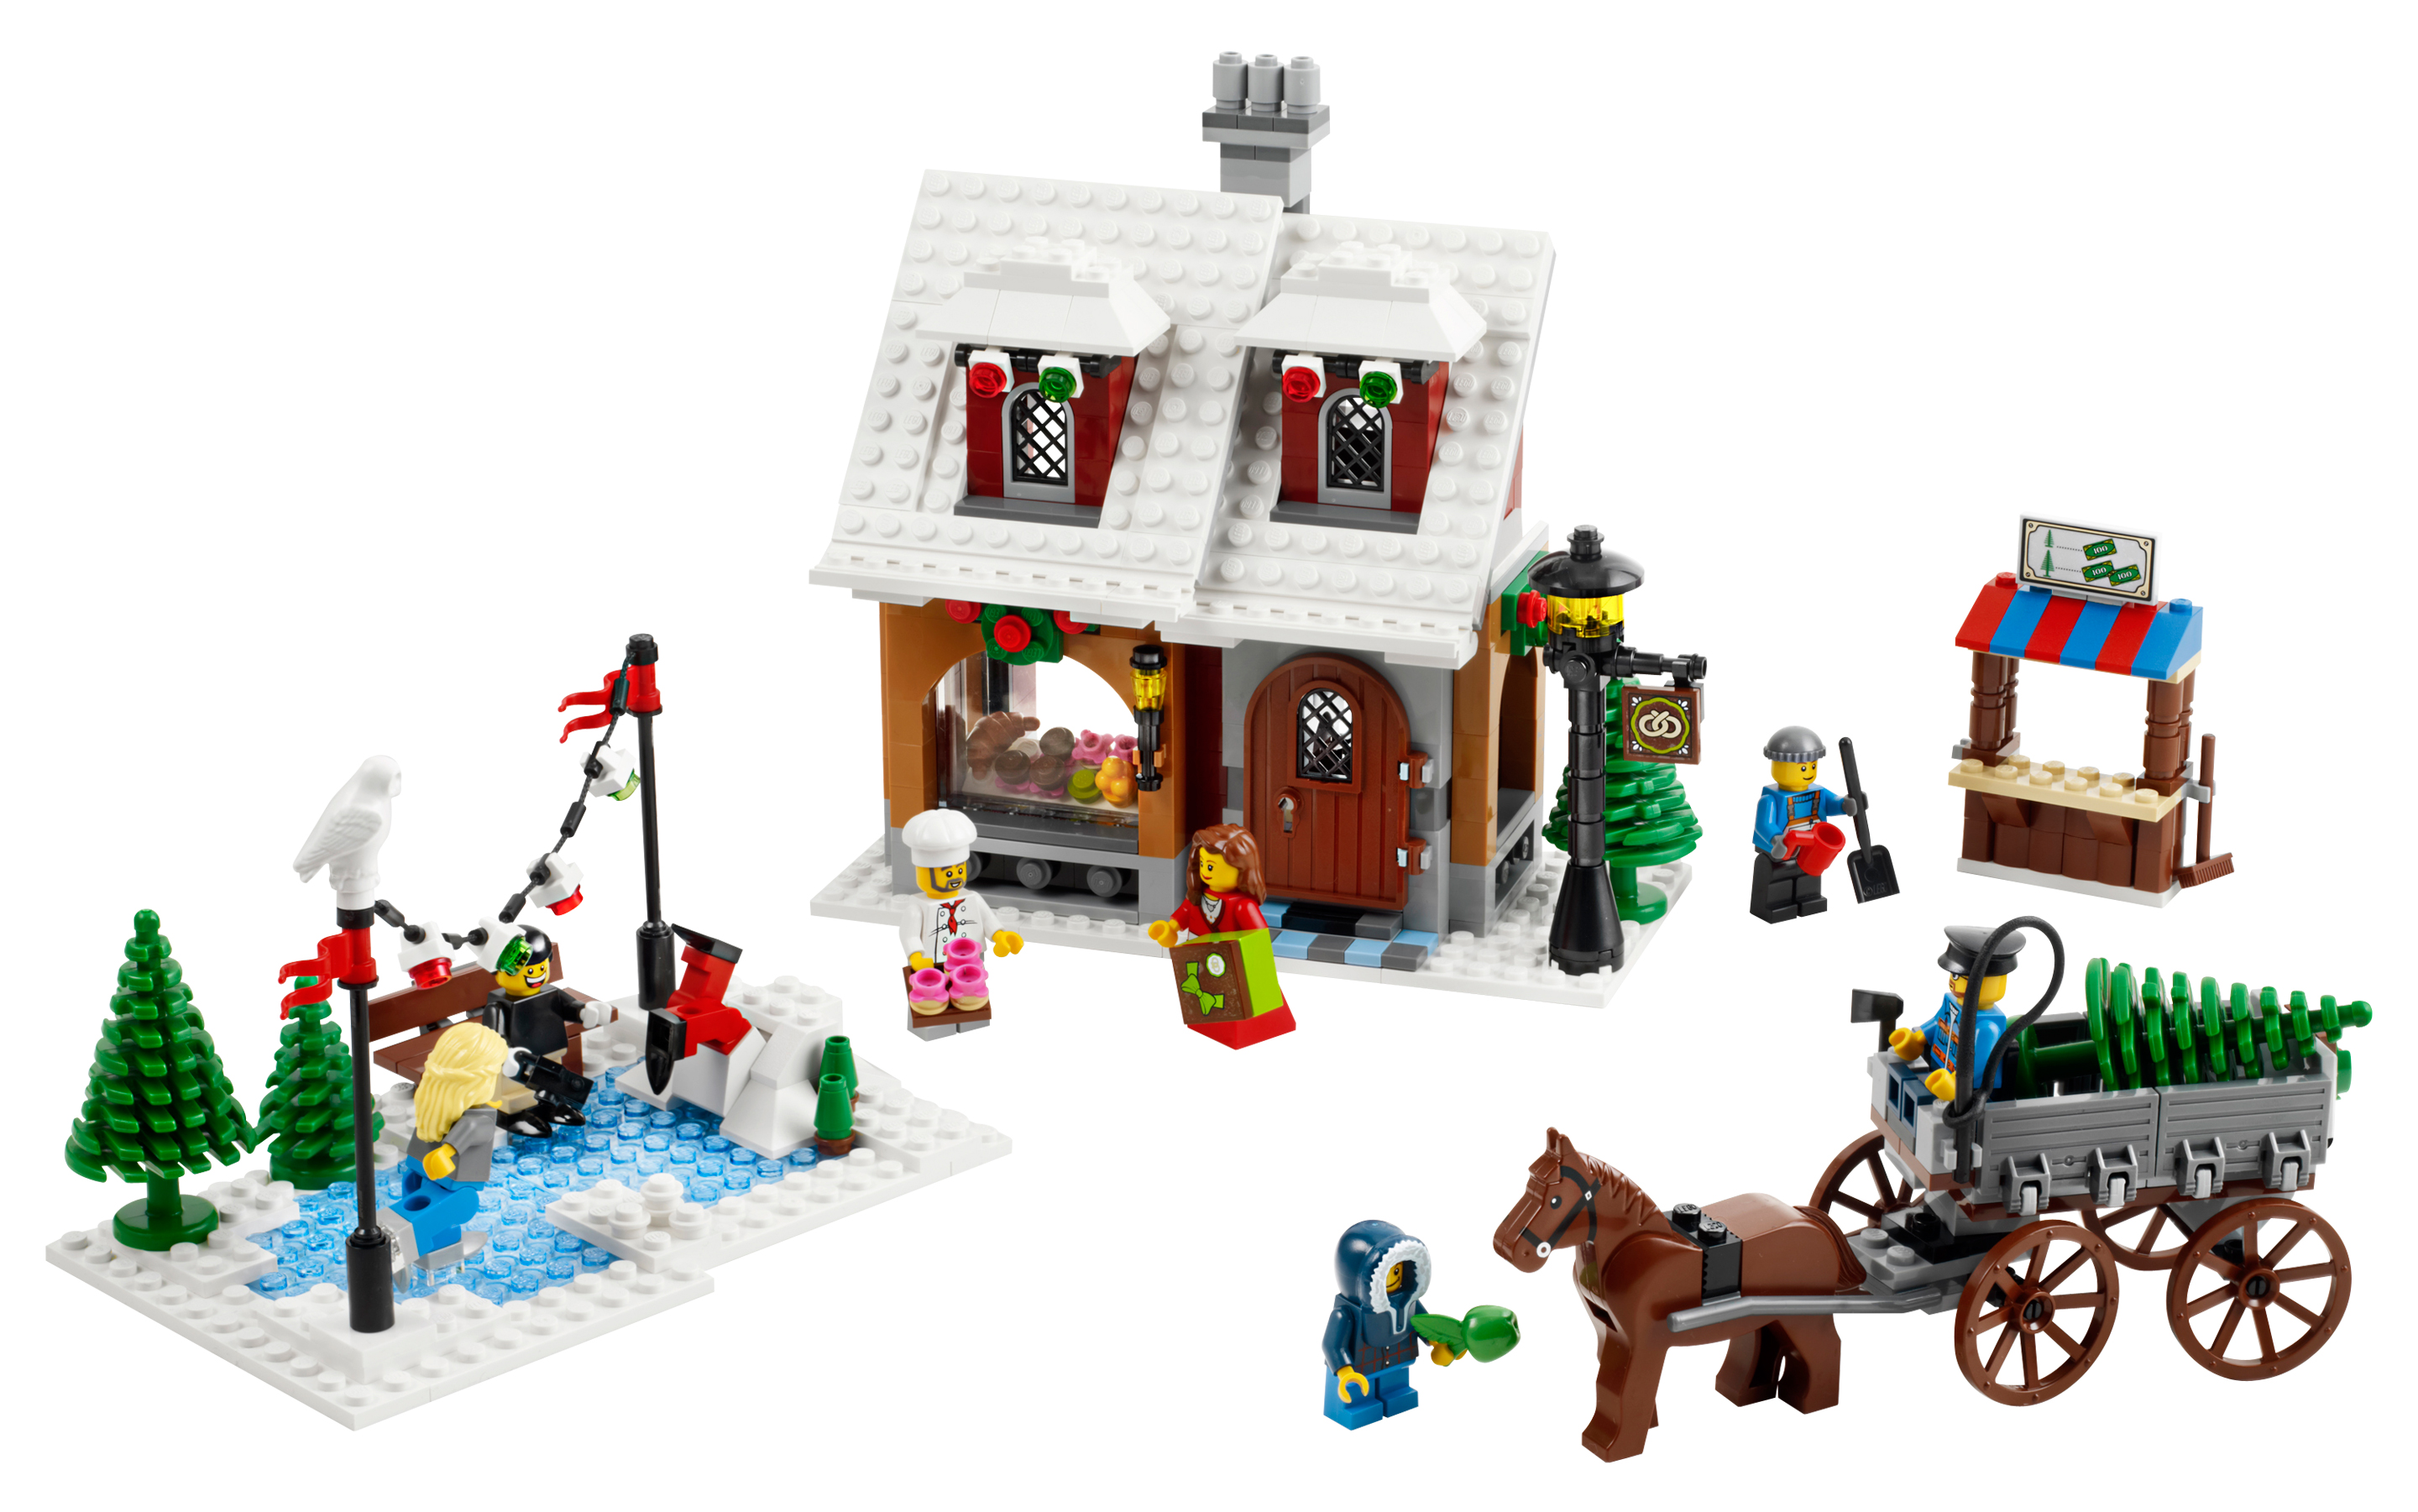 A Merry LEGO Christmas Sets Past, Present and Future